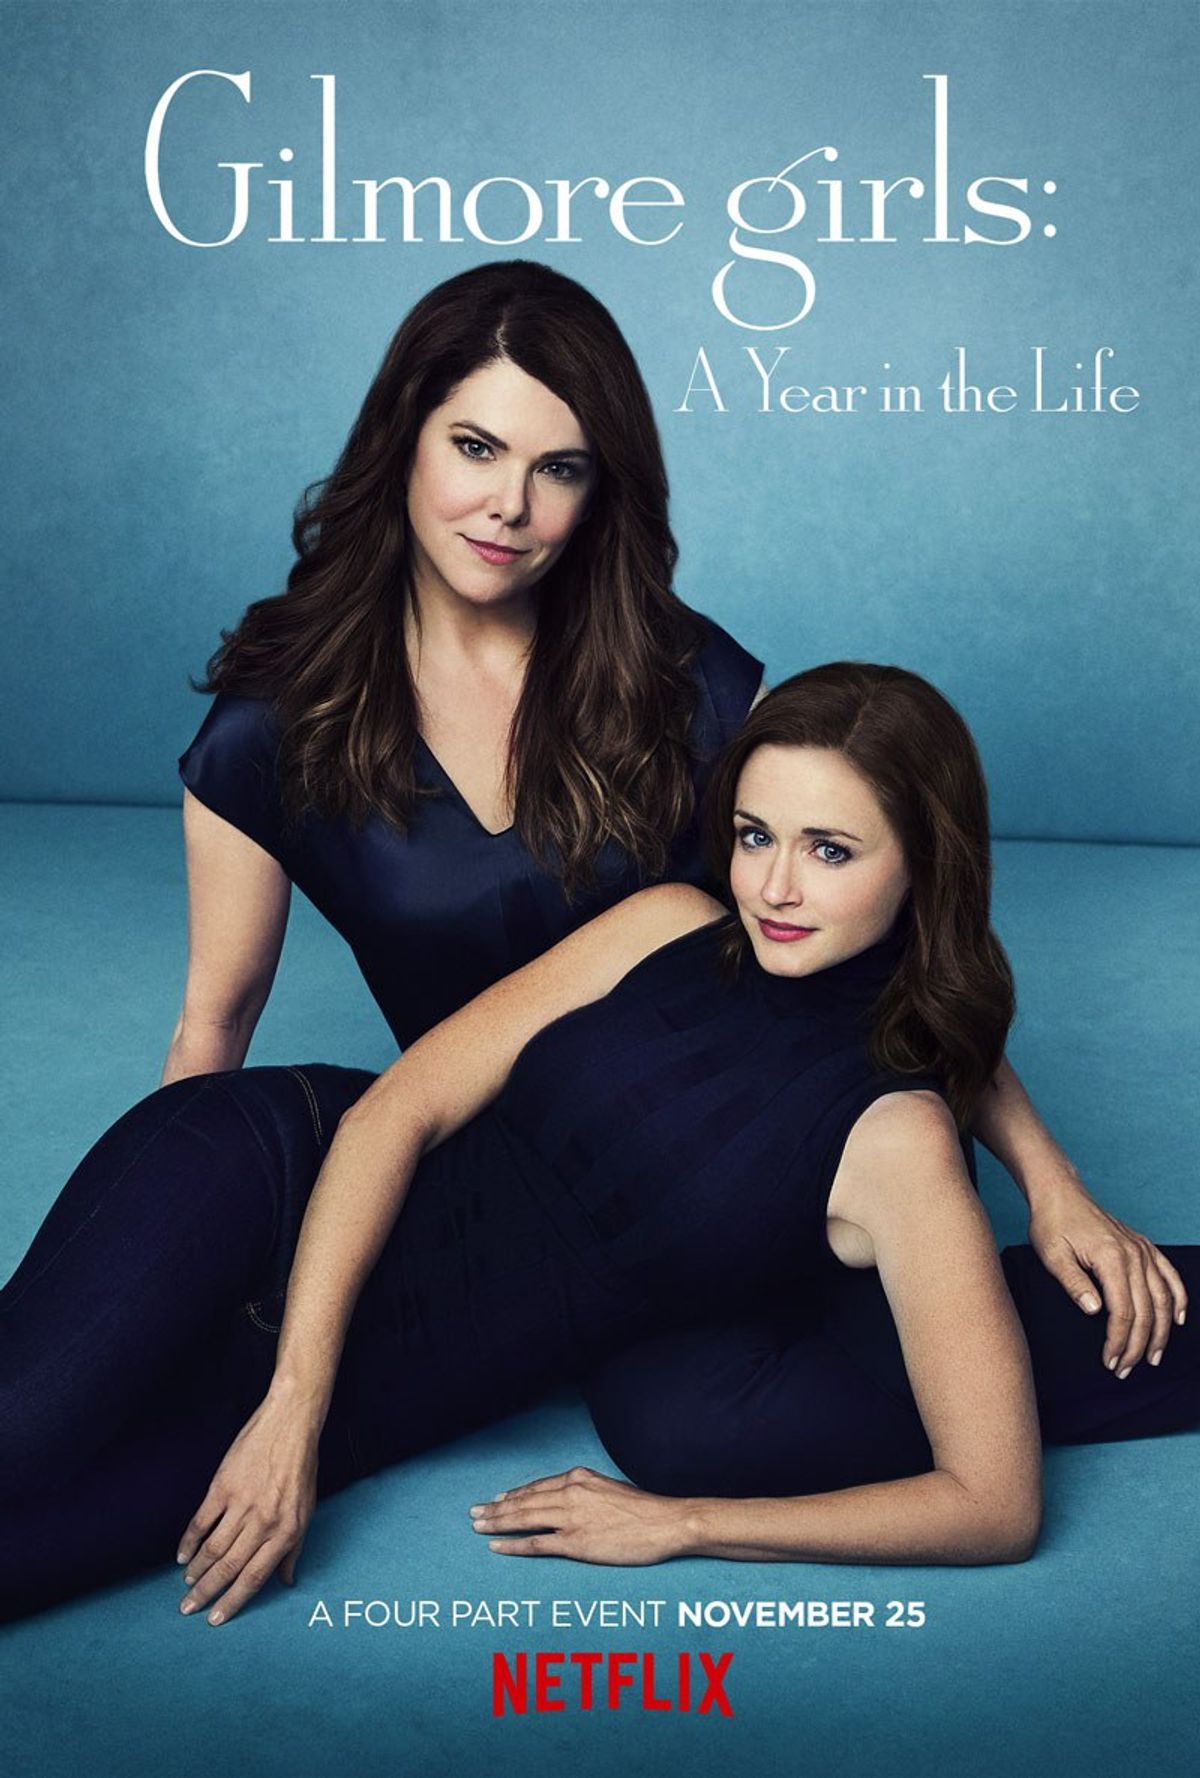 Ten Questions I Had After Watching Gilmore Girls: A Year in the Life